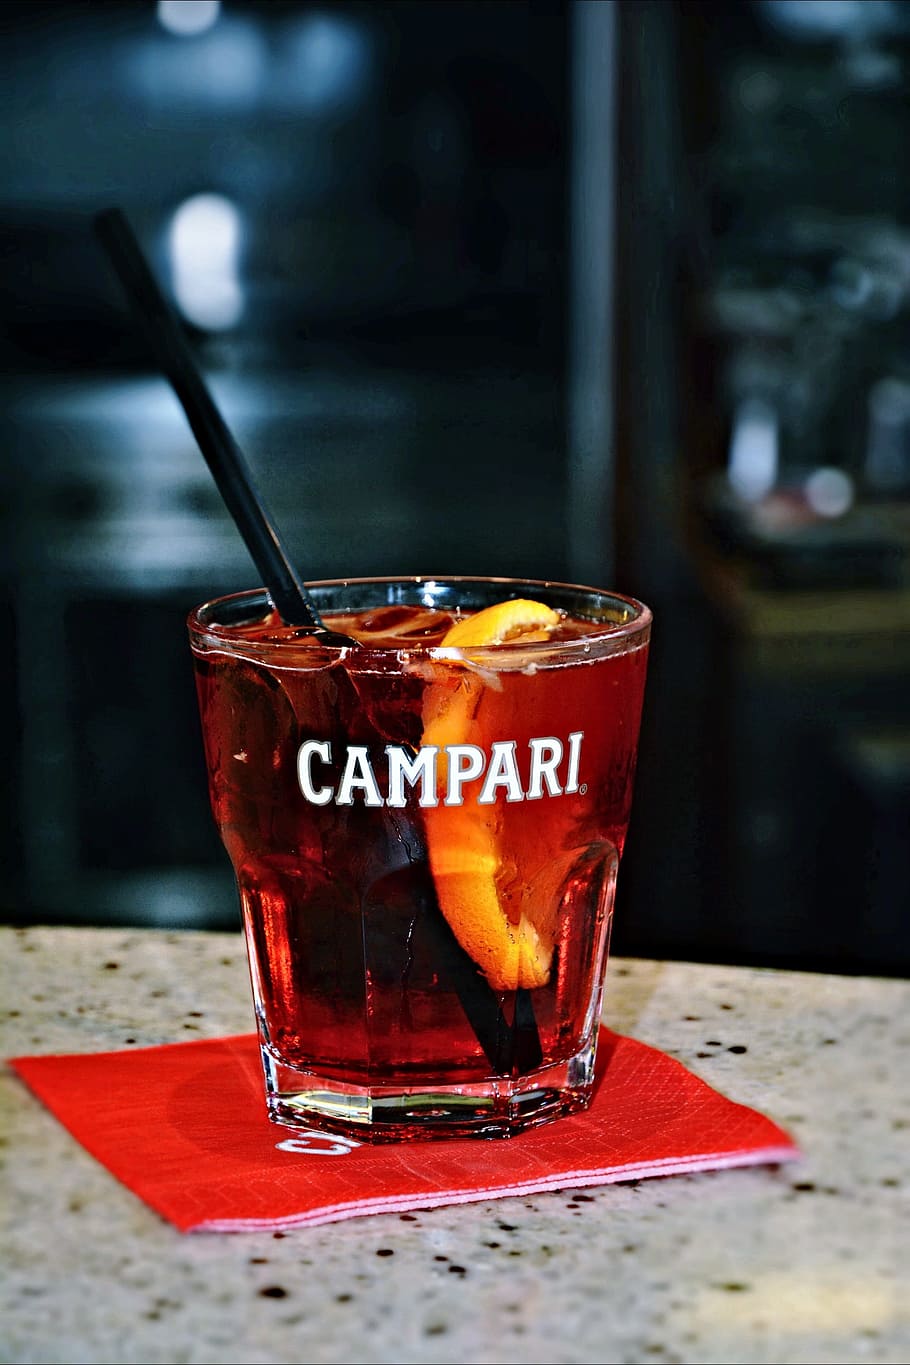 campari, negroni, cocktail, bar, drink, food and drink, table